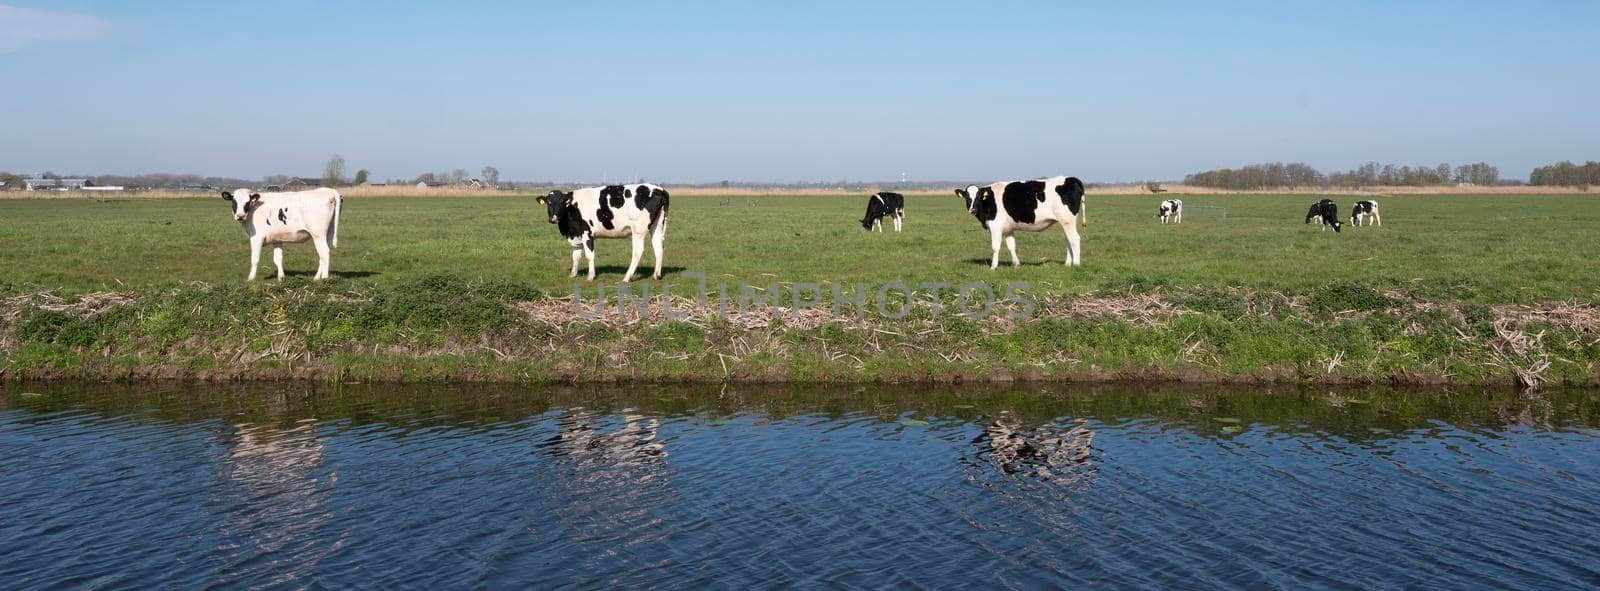 black and white spotted holstein calves in green grassy spring meadow under blue sky in the netherlands between utrecht and gouda